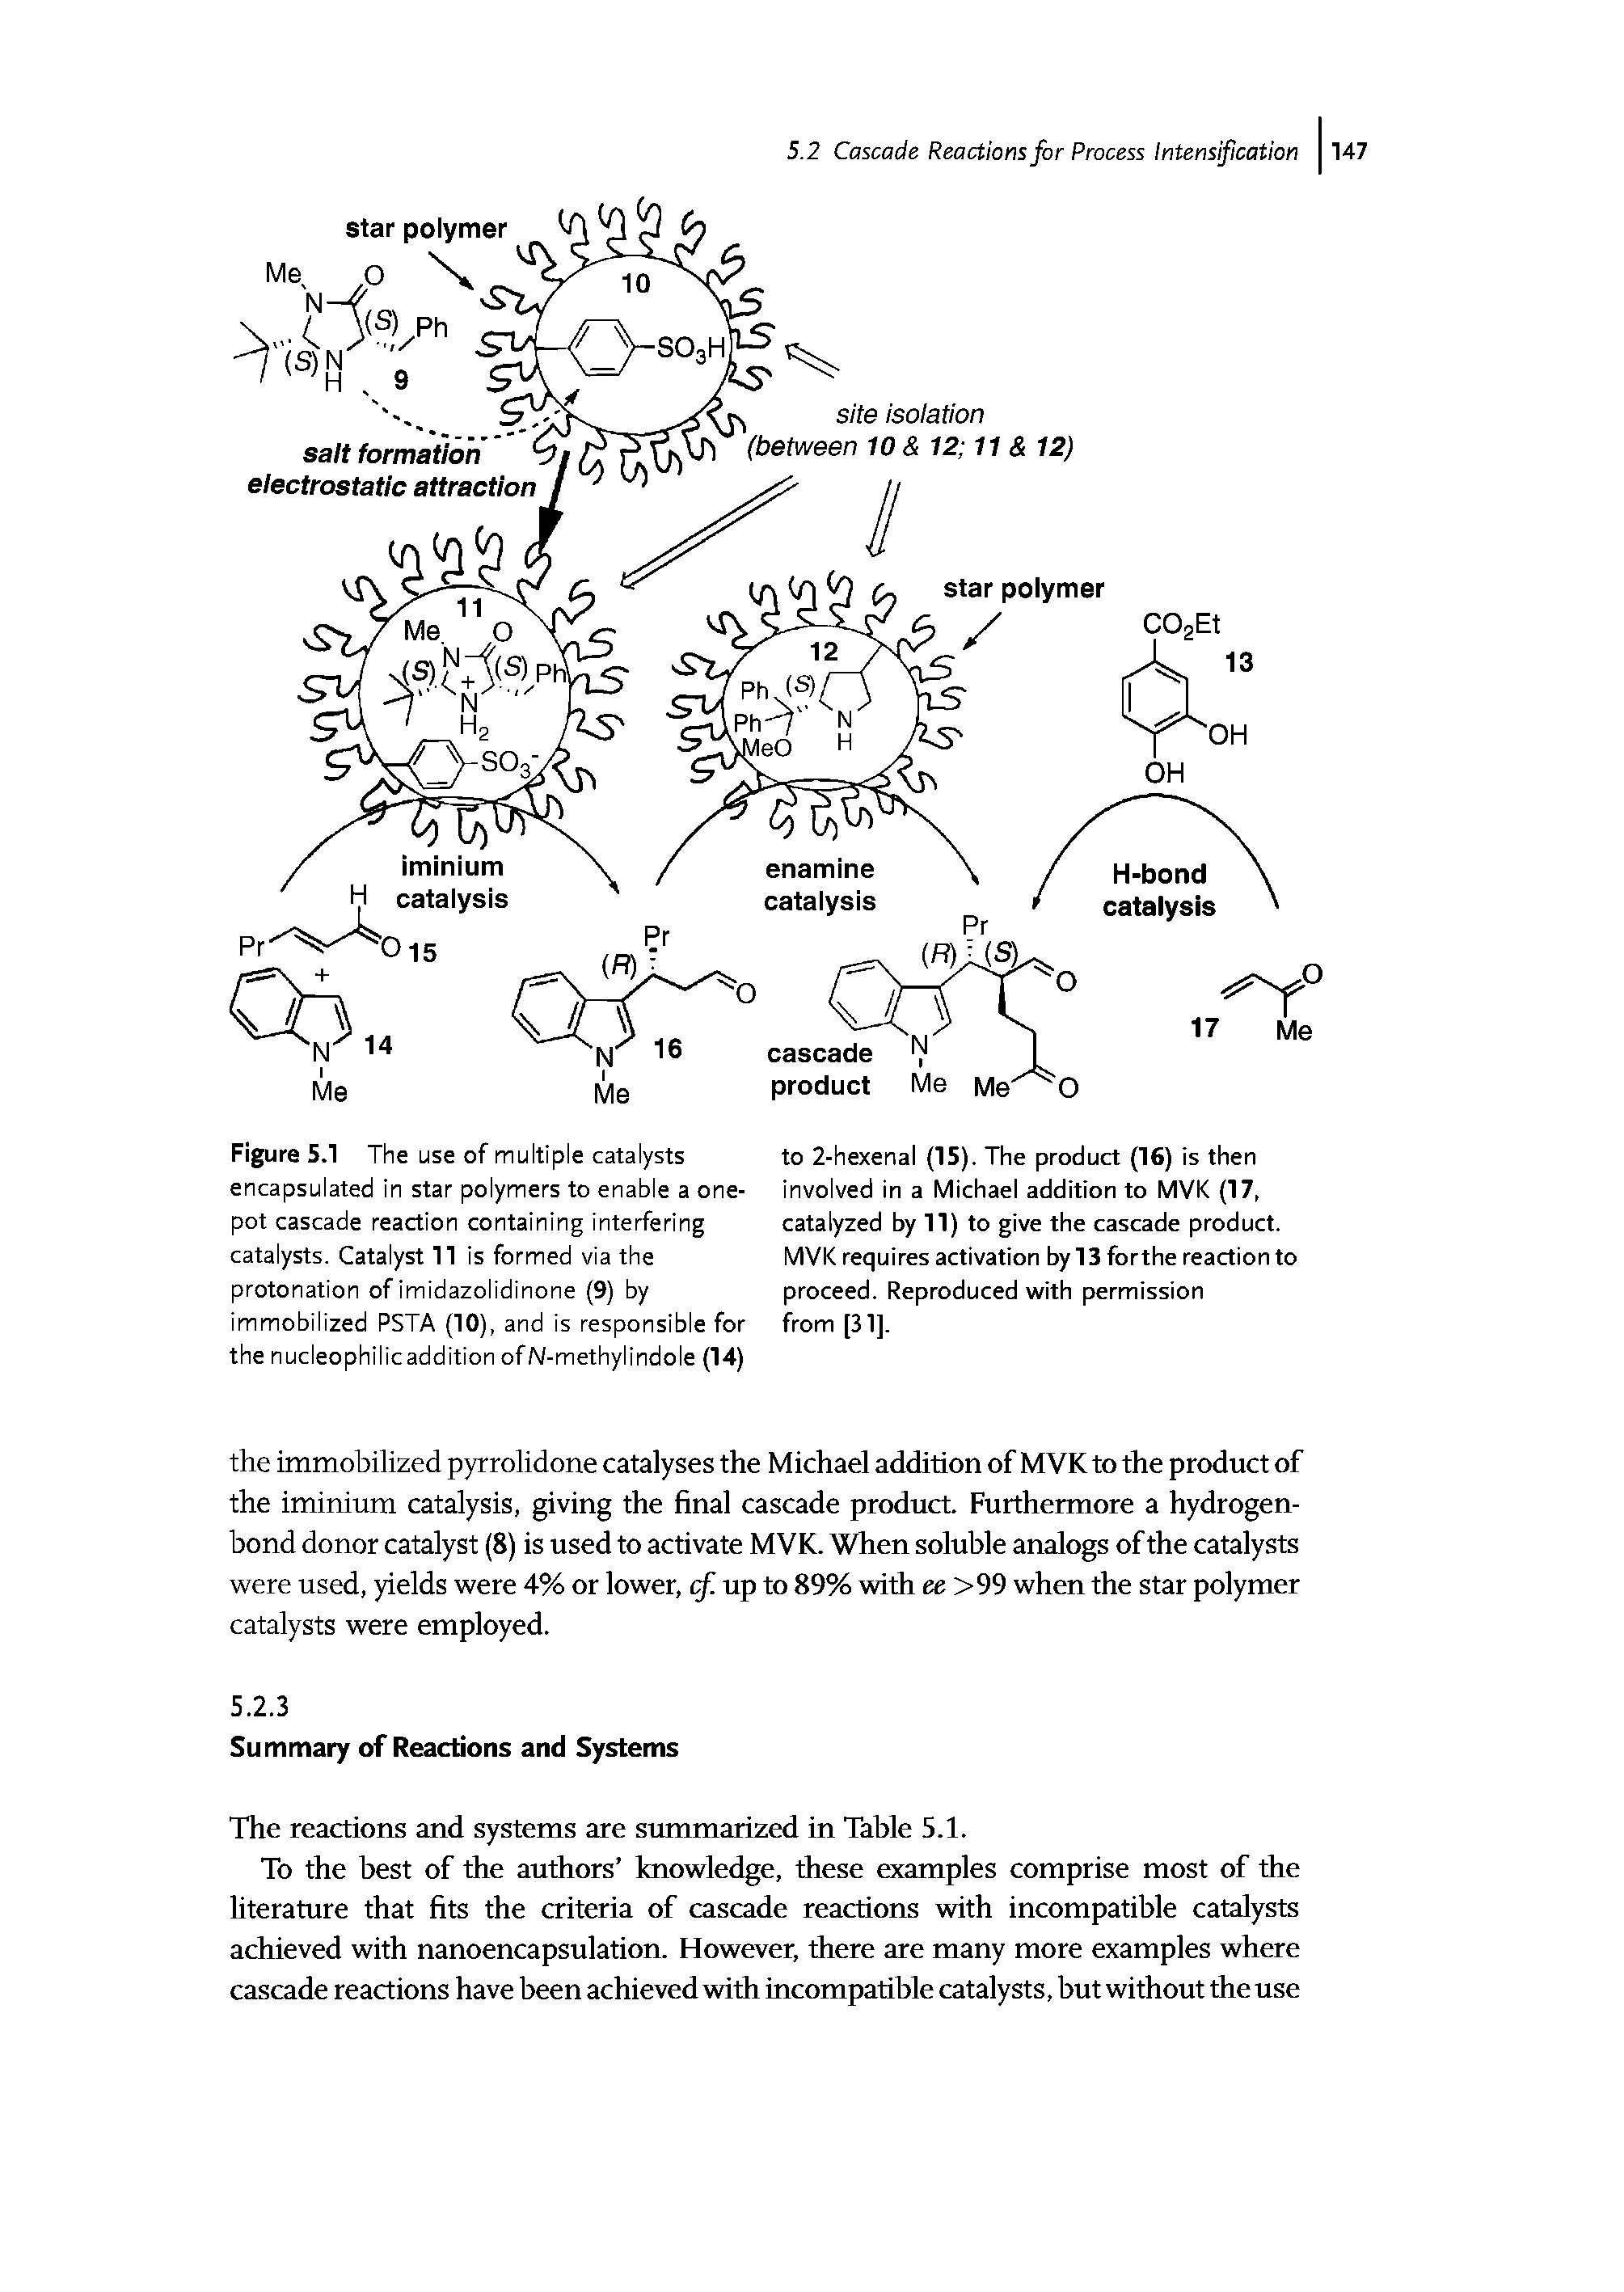 Figure 5.1 The use of multiple catalysts encapsulated in star polymers to enable a one-pot cascade reaction containing interfering catalysts. Catalyst 11 is formed via the protonation of imidazolidinone (9) by immobilized PSTA (10), and is responsible for the nucleophilicaddition ofN-methylindole (14)...